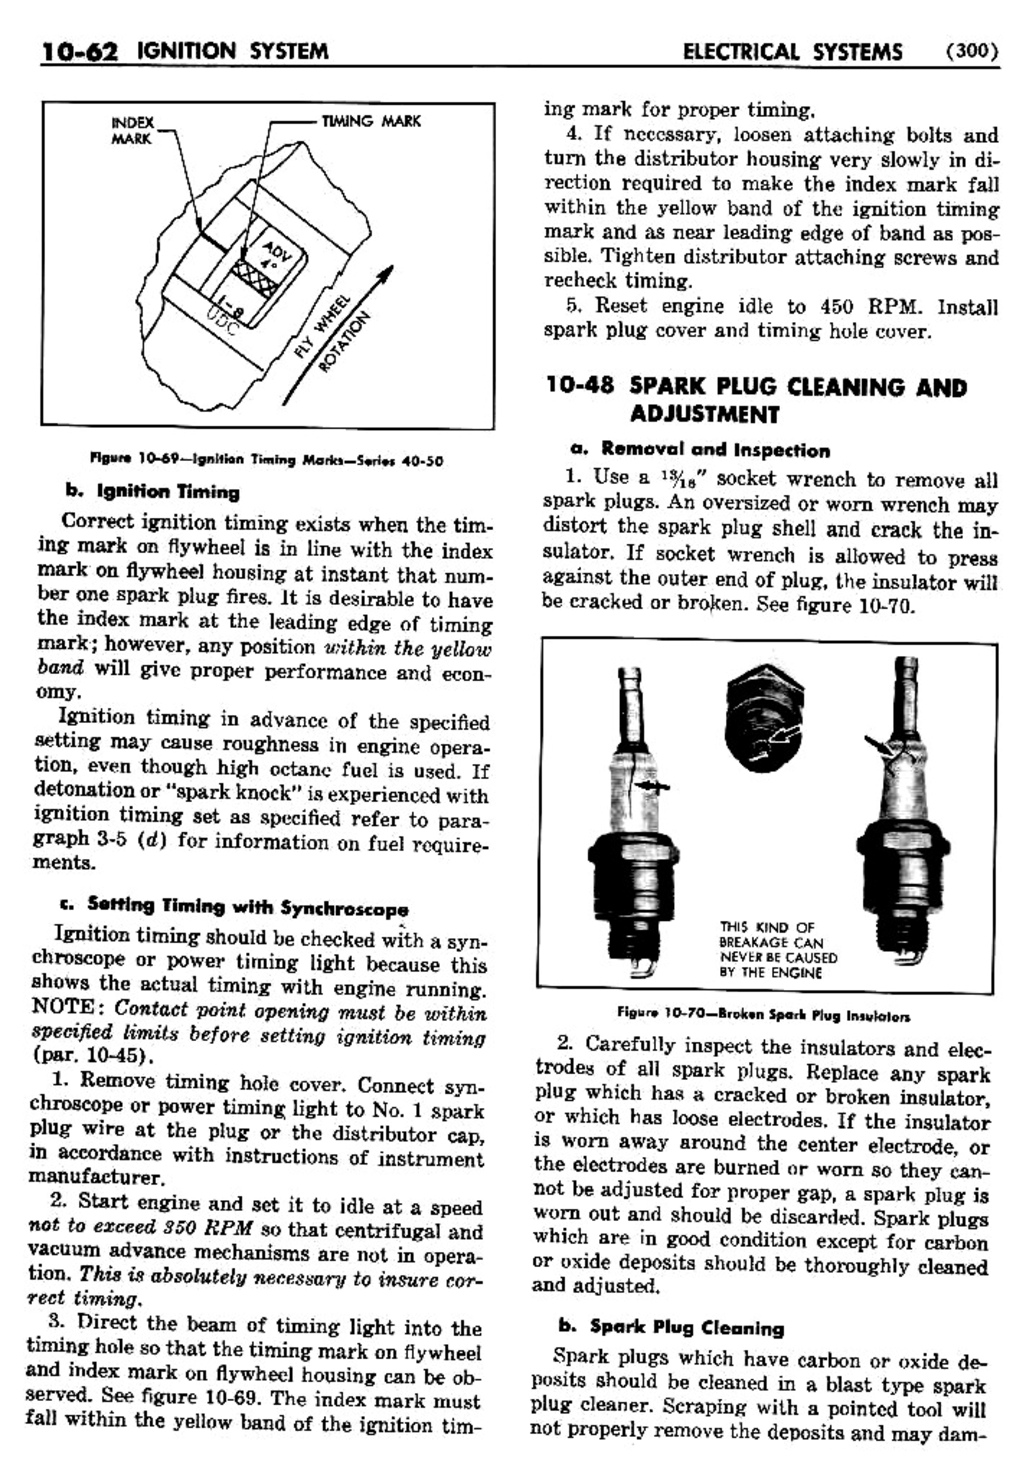 n_11 1950 Buick Shop Manual - Electrical Systems-062-062.jpg